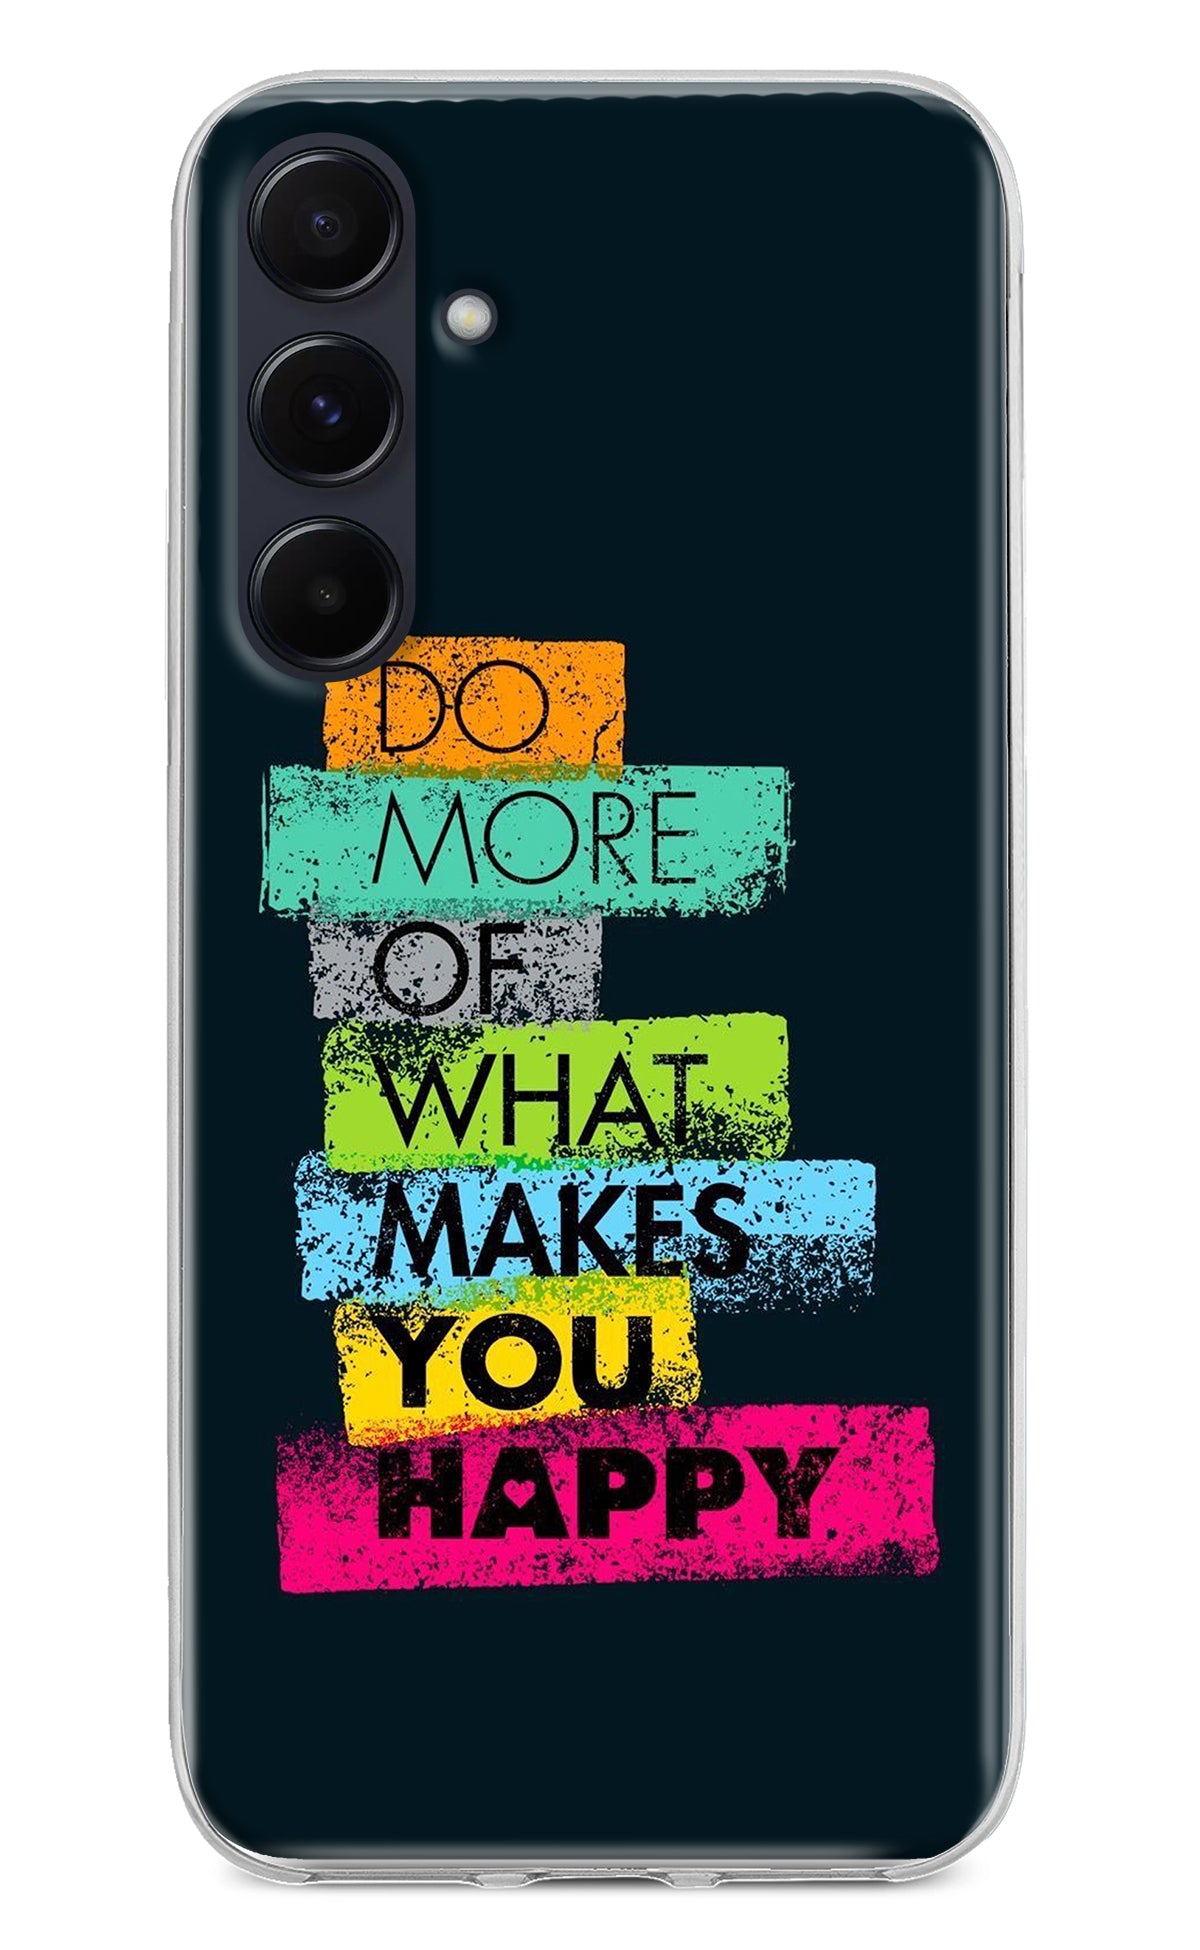 Do More Of What Makes You Happy Samsung A55 5G Back Cover